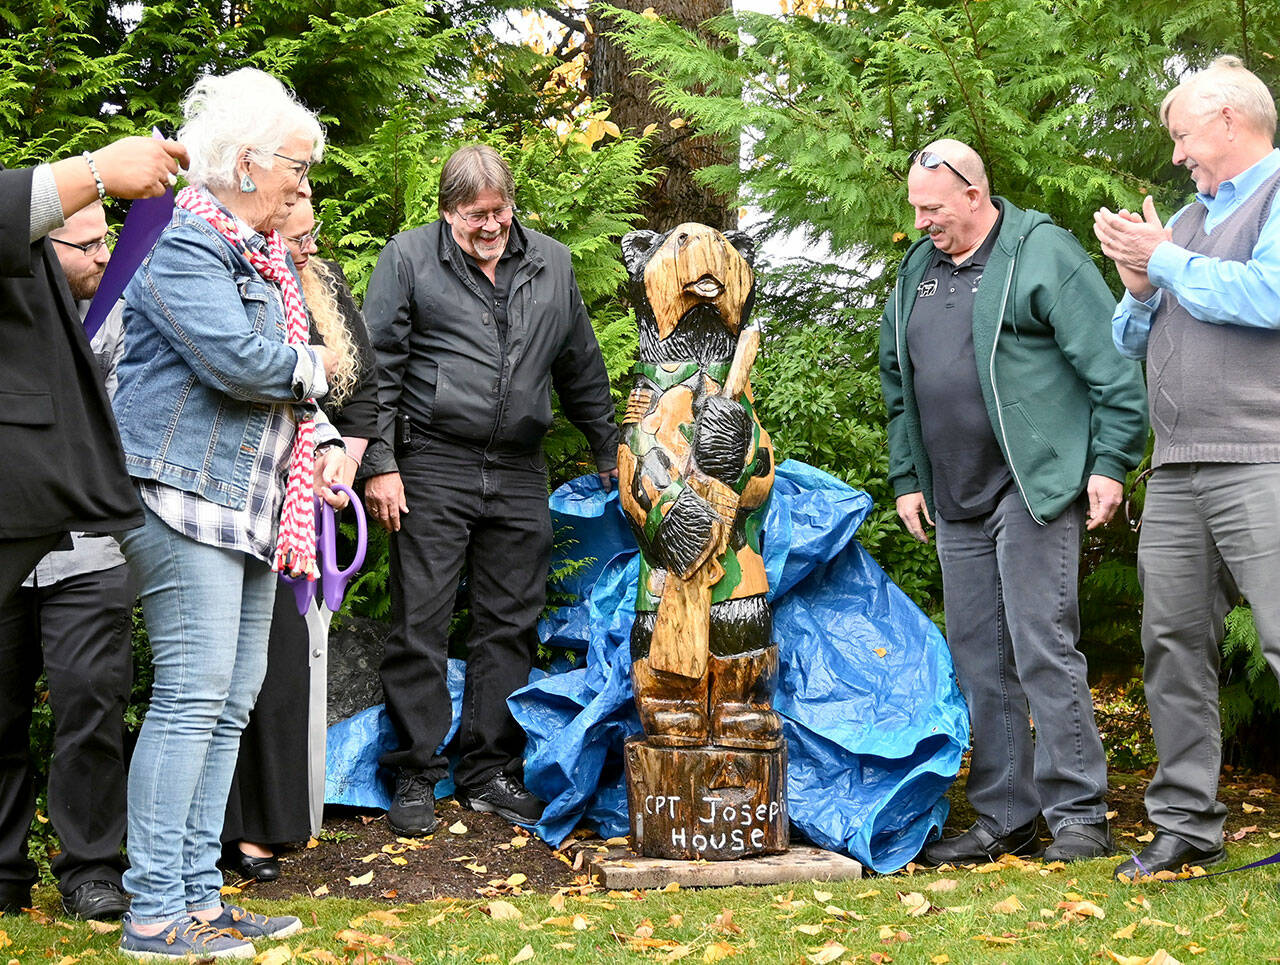 Betsy Reed Schultz (far left), founder of Captain Joseph House, gets a look at a carved bear donated by Bret Wirta’s Black Bear Diner and Holiday Inn & Suites last week at the Port Angeles facility. (Michael Dashiell/Olympic Peninsula News Group)